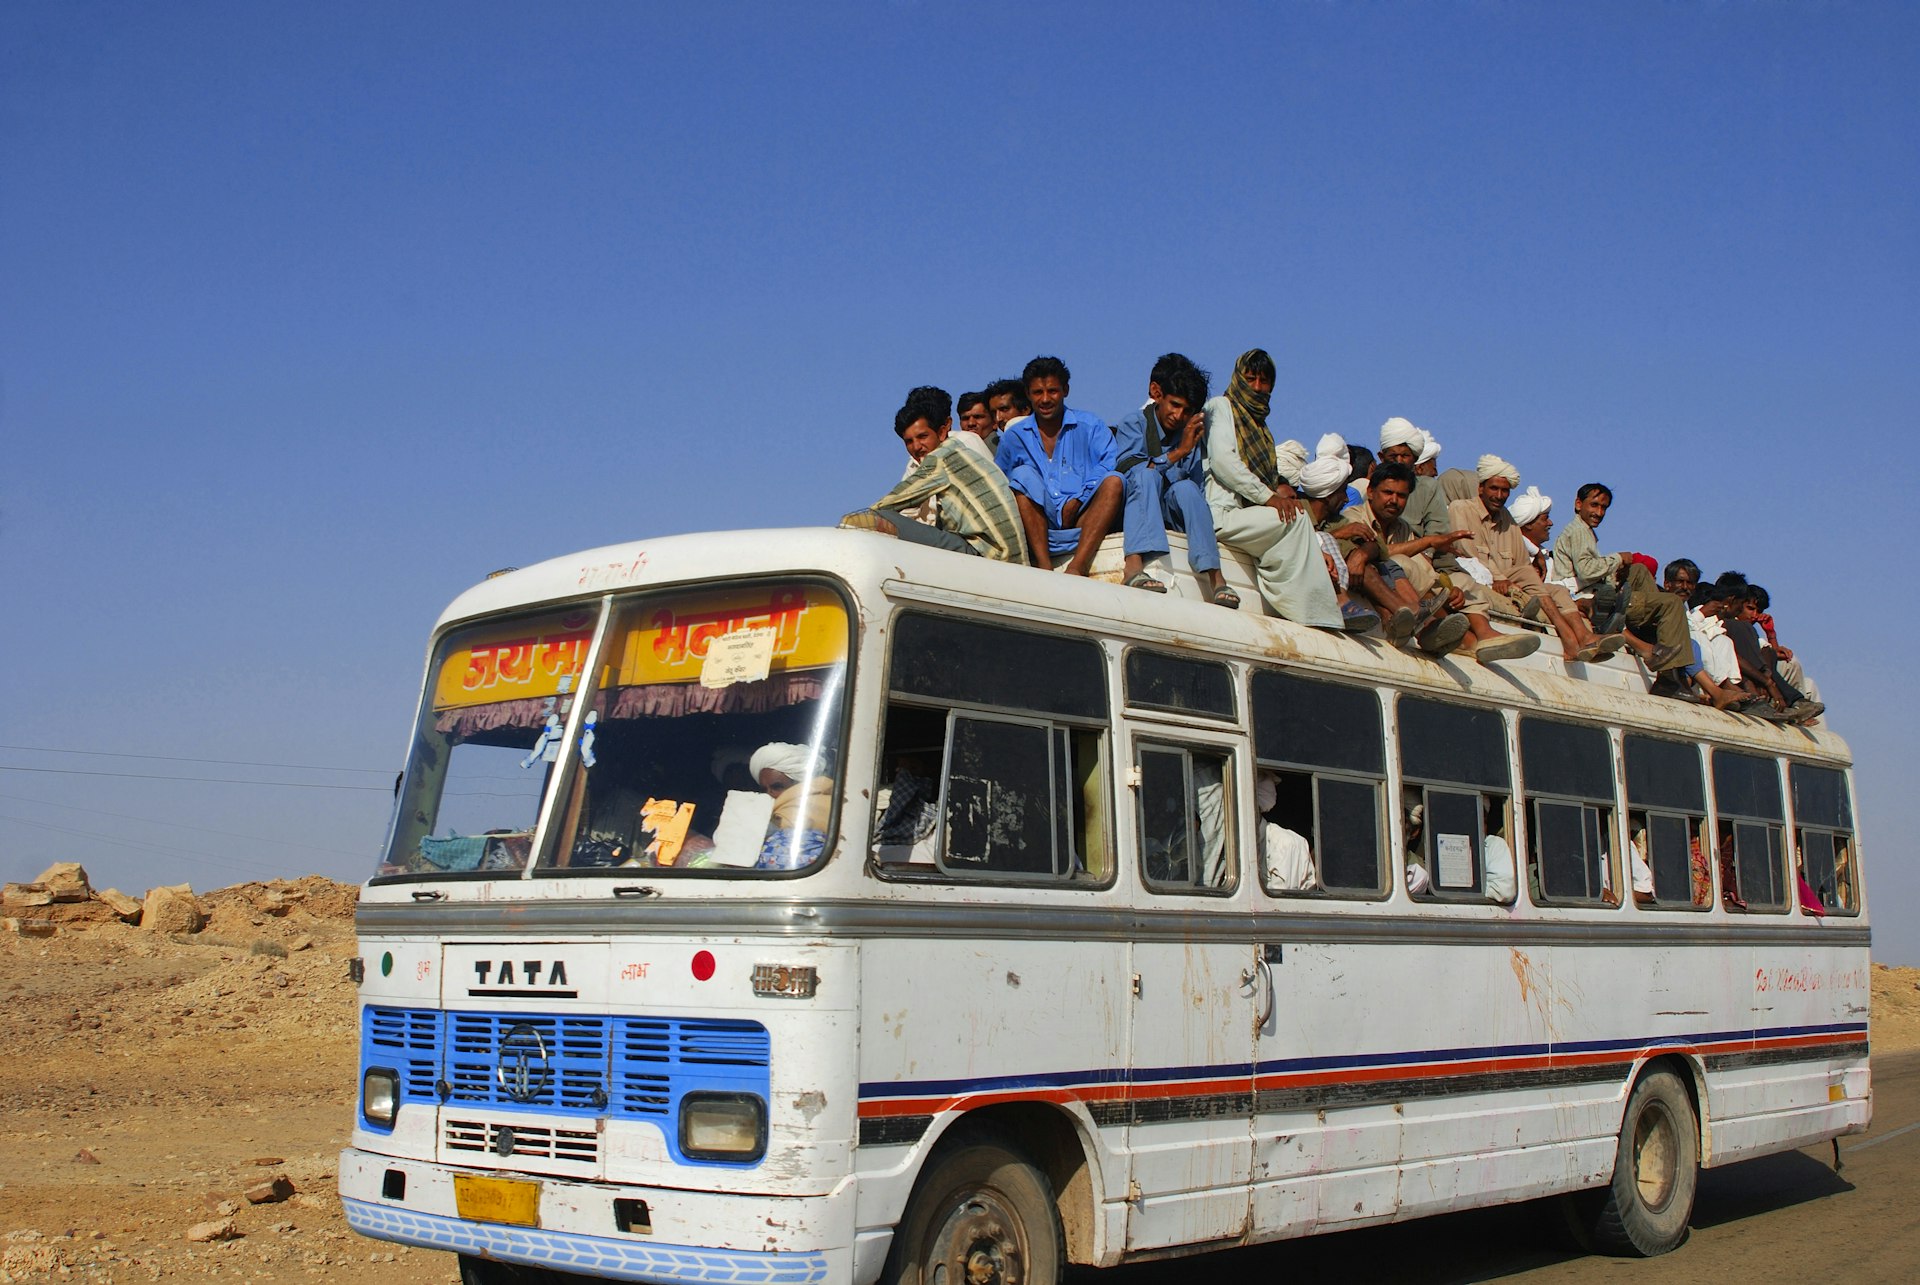 People crowding on the roof of a bus, Jaisalmer, Rajasthan, India